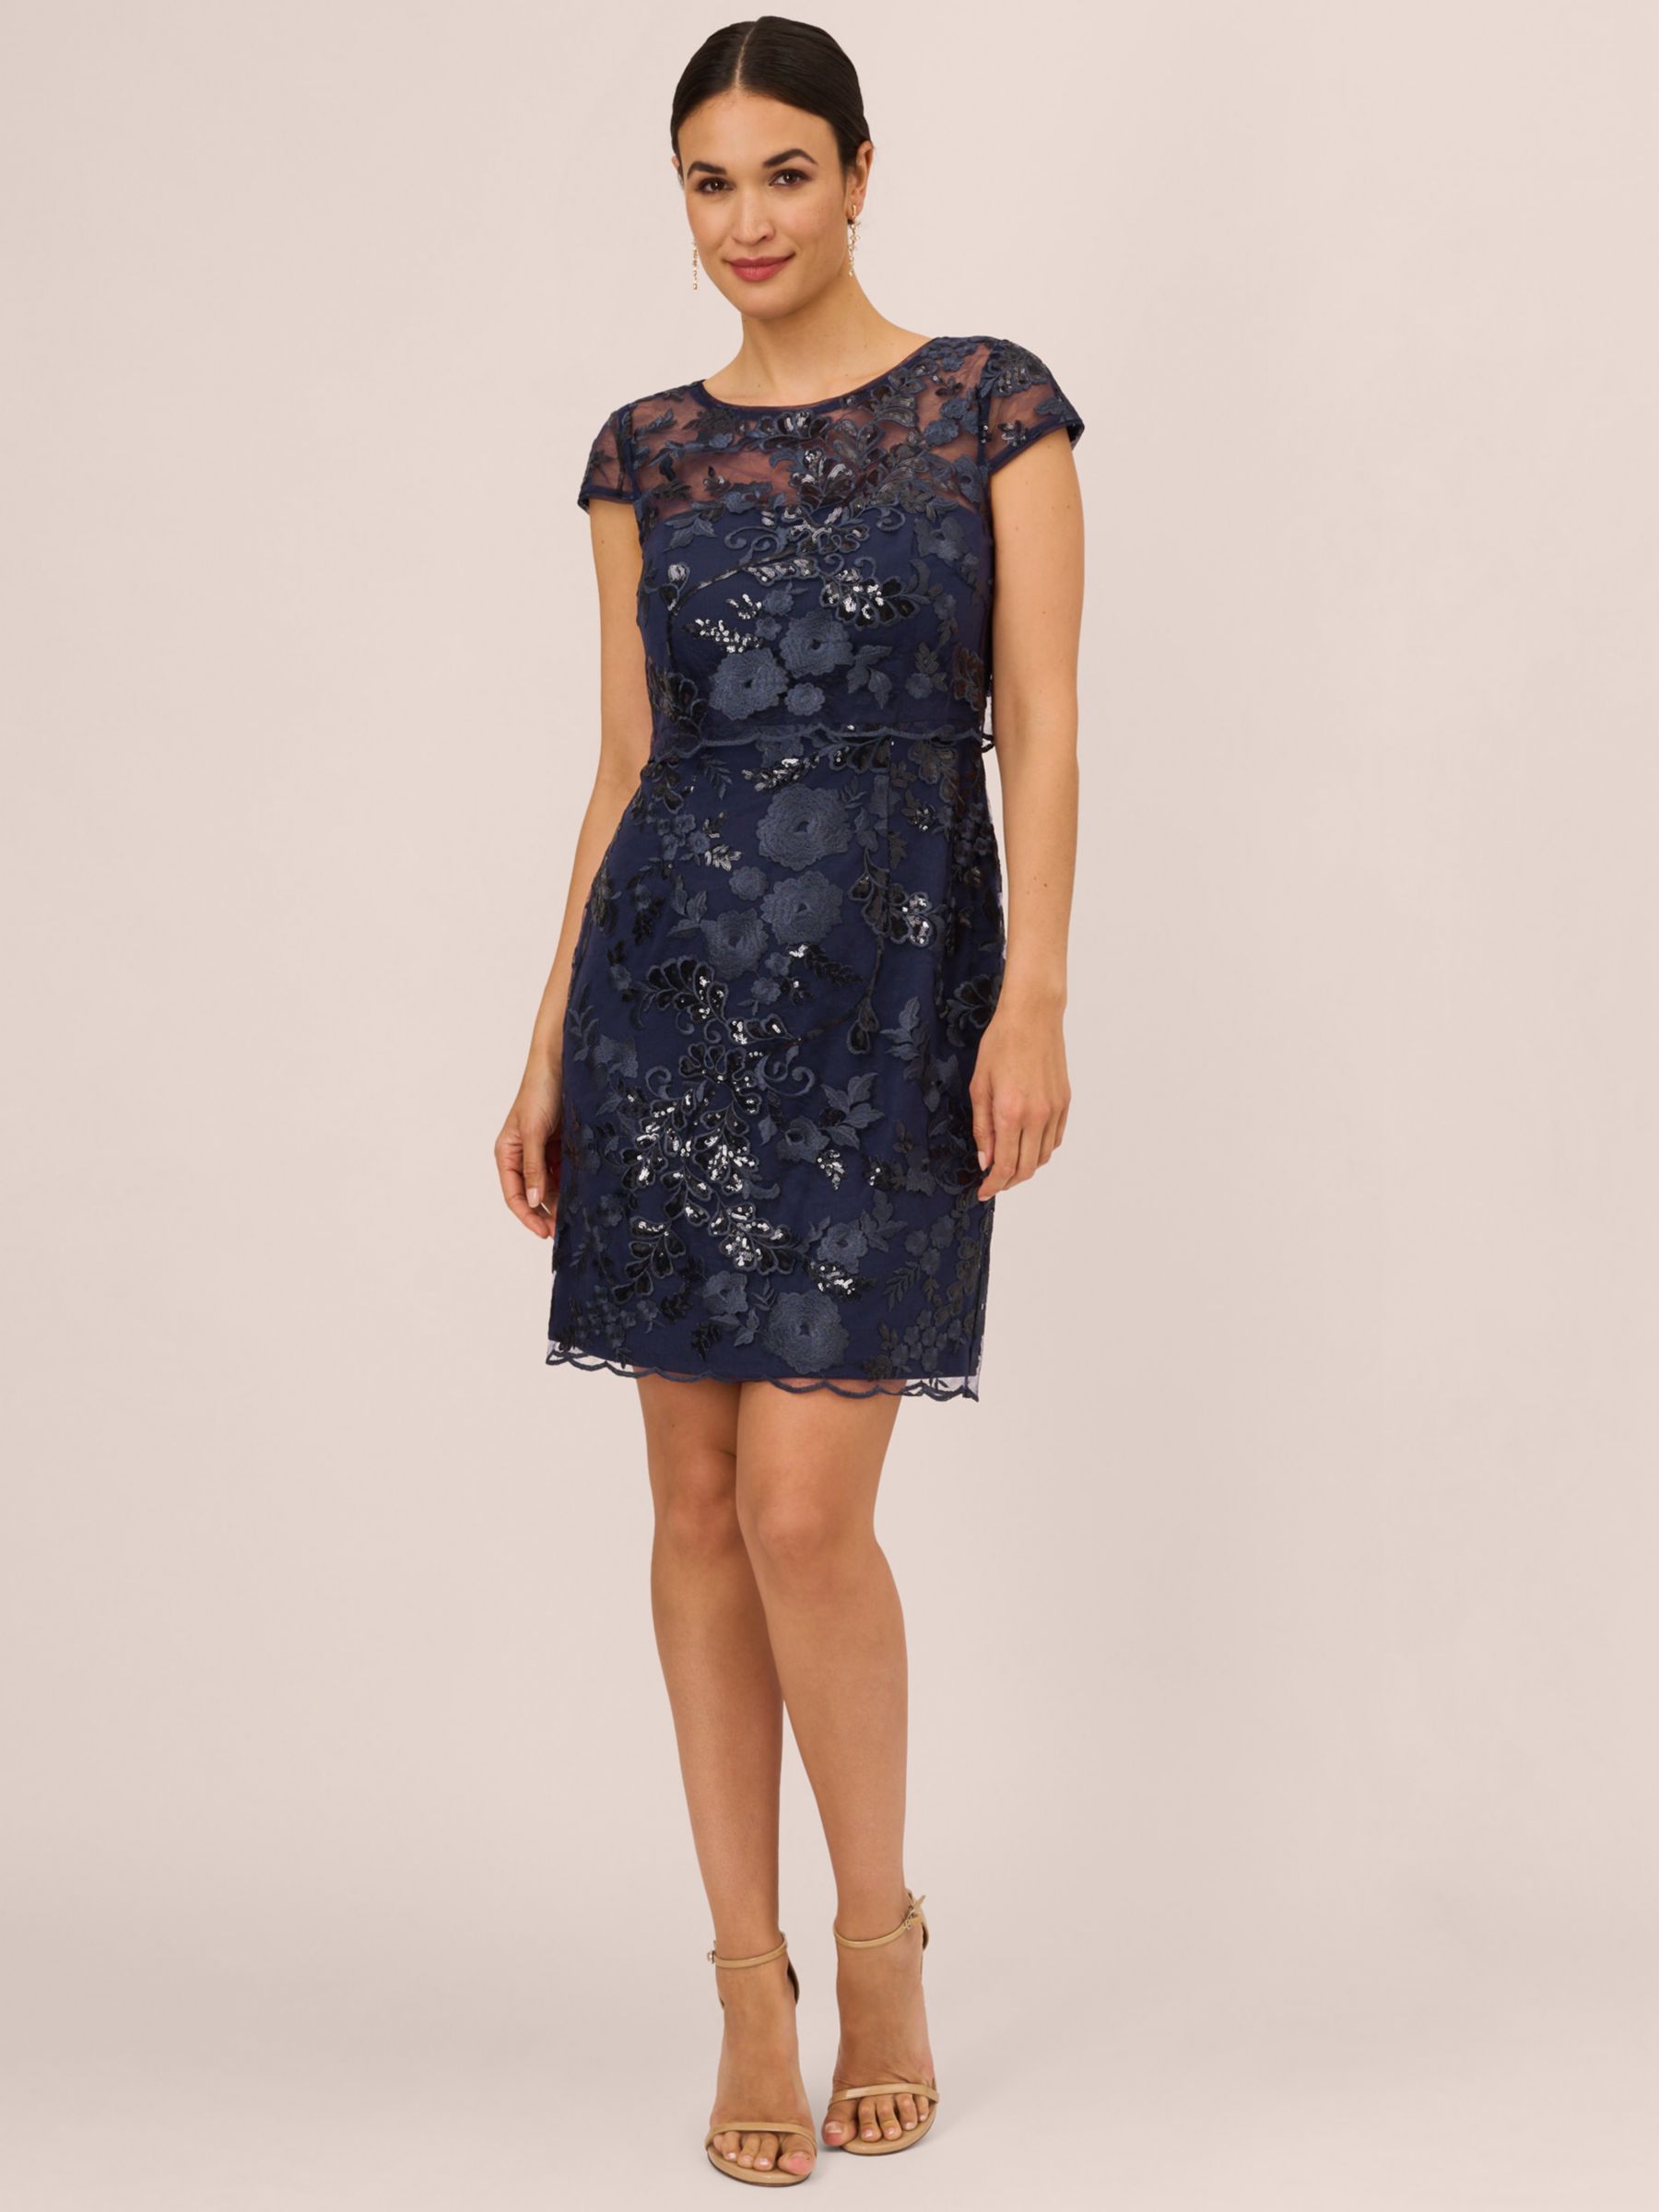 Adrianna Papell Sequin Popover Mini Dress, Navy at John Lewis & Partners